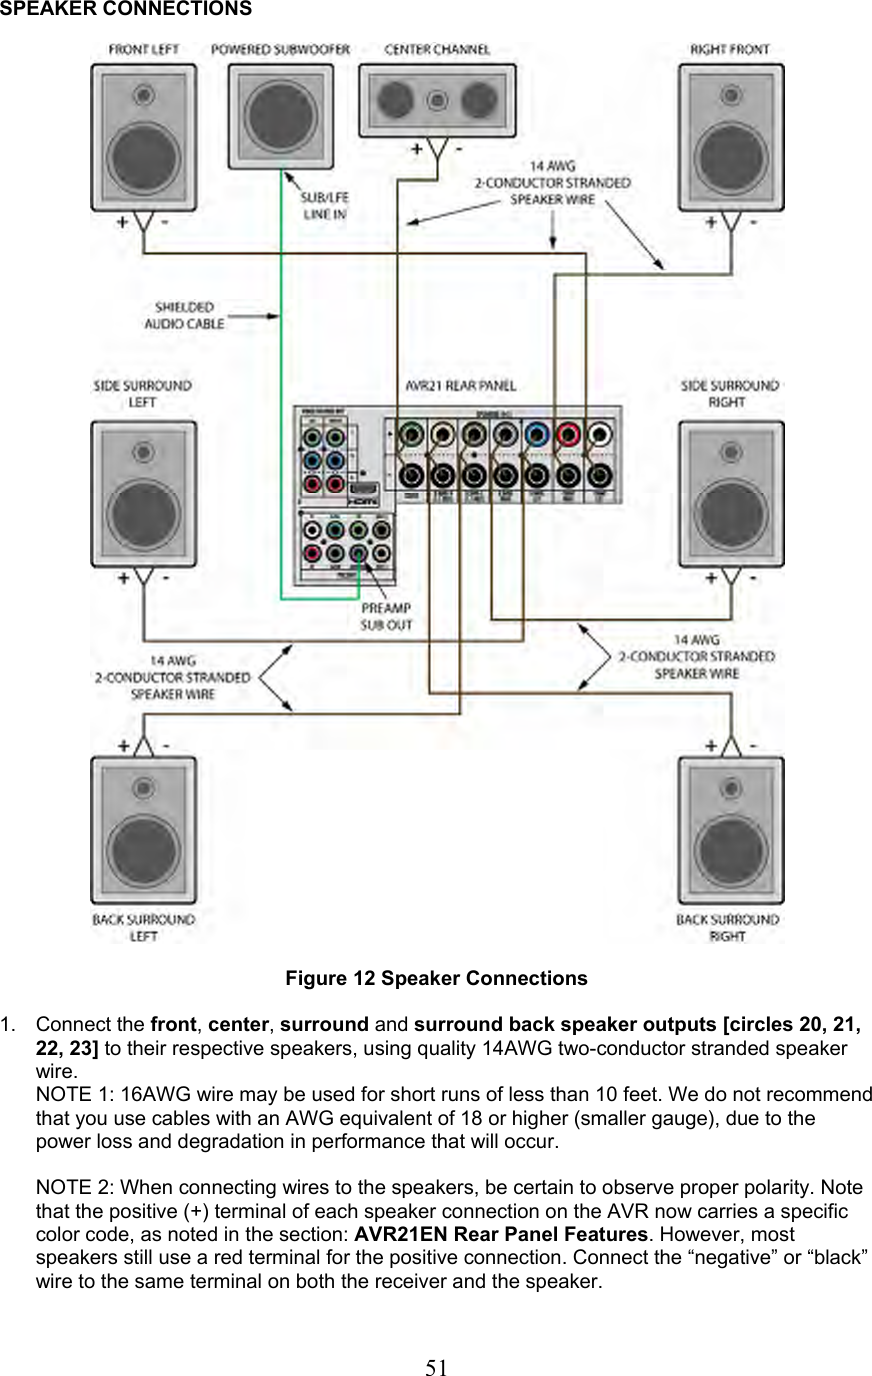  51SPEAKER CONNECTIONS    Figure 12 Speaker Connections  1. Connect the front, center, surround and surround back speaker outputs [circles 20, 21, 22, 23] to their respective speakers, using quality 14AWG two-conductor stranded speaker wire. NOTE 1: 16AWG wire may be used for short runs of less than 10 feet. We do not recommend that you use cables with an AWG equivalent of 18 or higher (smaller gauge), due to the power loss and degradation in performance that will occur.  NOTE 2: When connecting wires to the speakers, be certain to observe proper polarity. Note that the positive (+) terminal of each speaker connection on the AVR now carries a specific color code, as noted in the section: AVR21EN Rear Panel Features. However, most speakers still use a red terminal for the positive connection. Connect the “negative” or “black” wire to the same terminal on both the receiver and the speaker. 